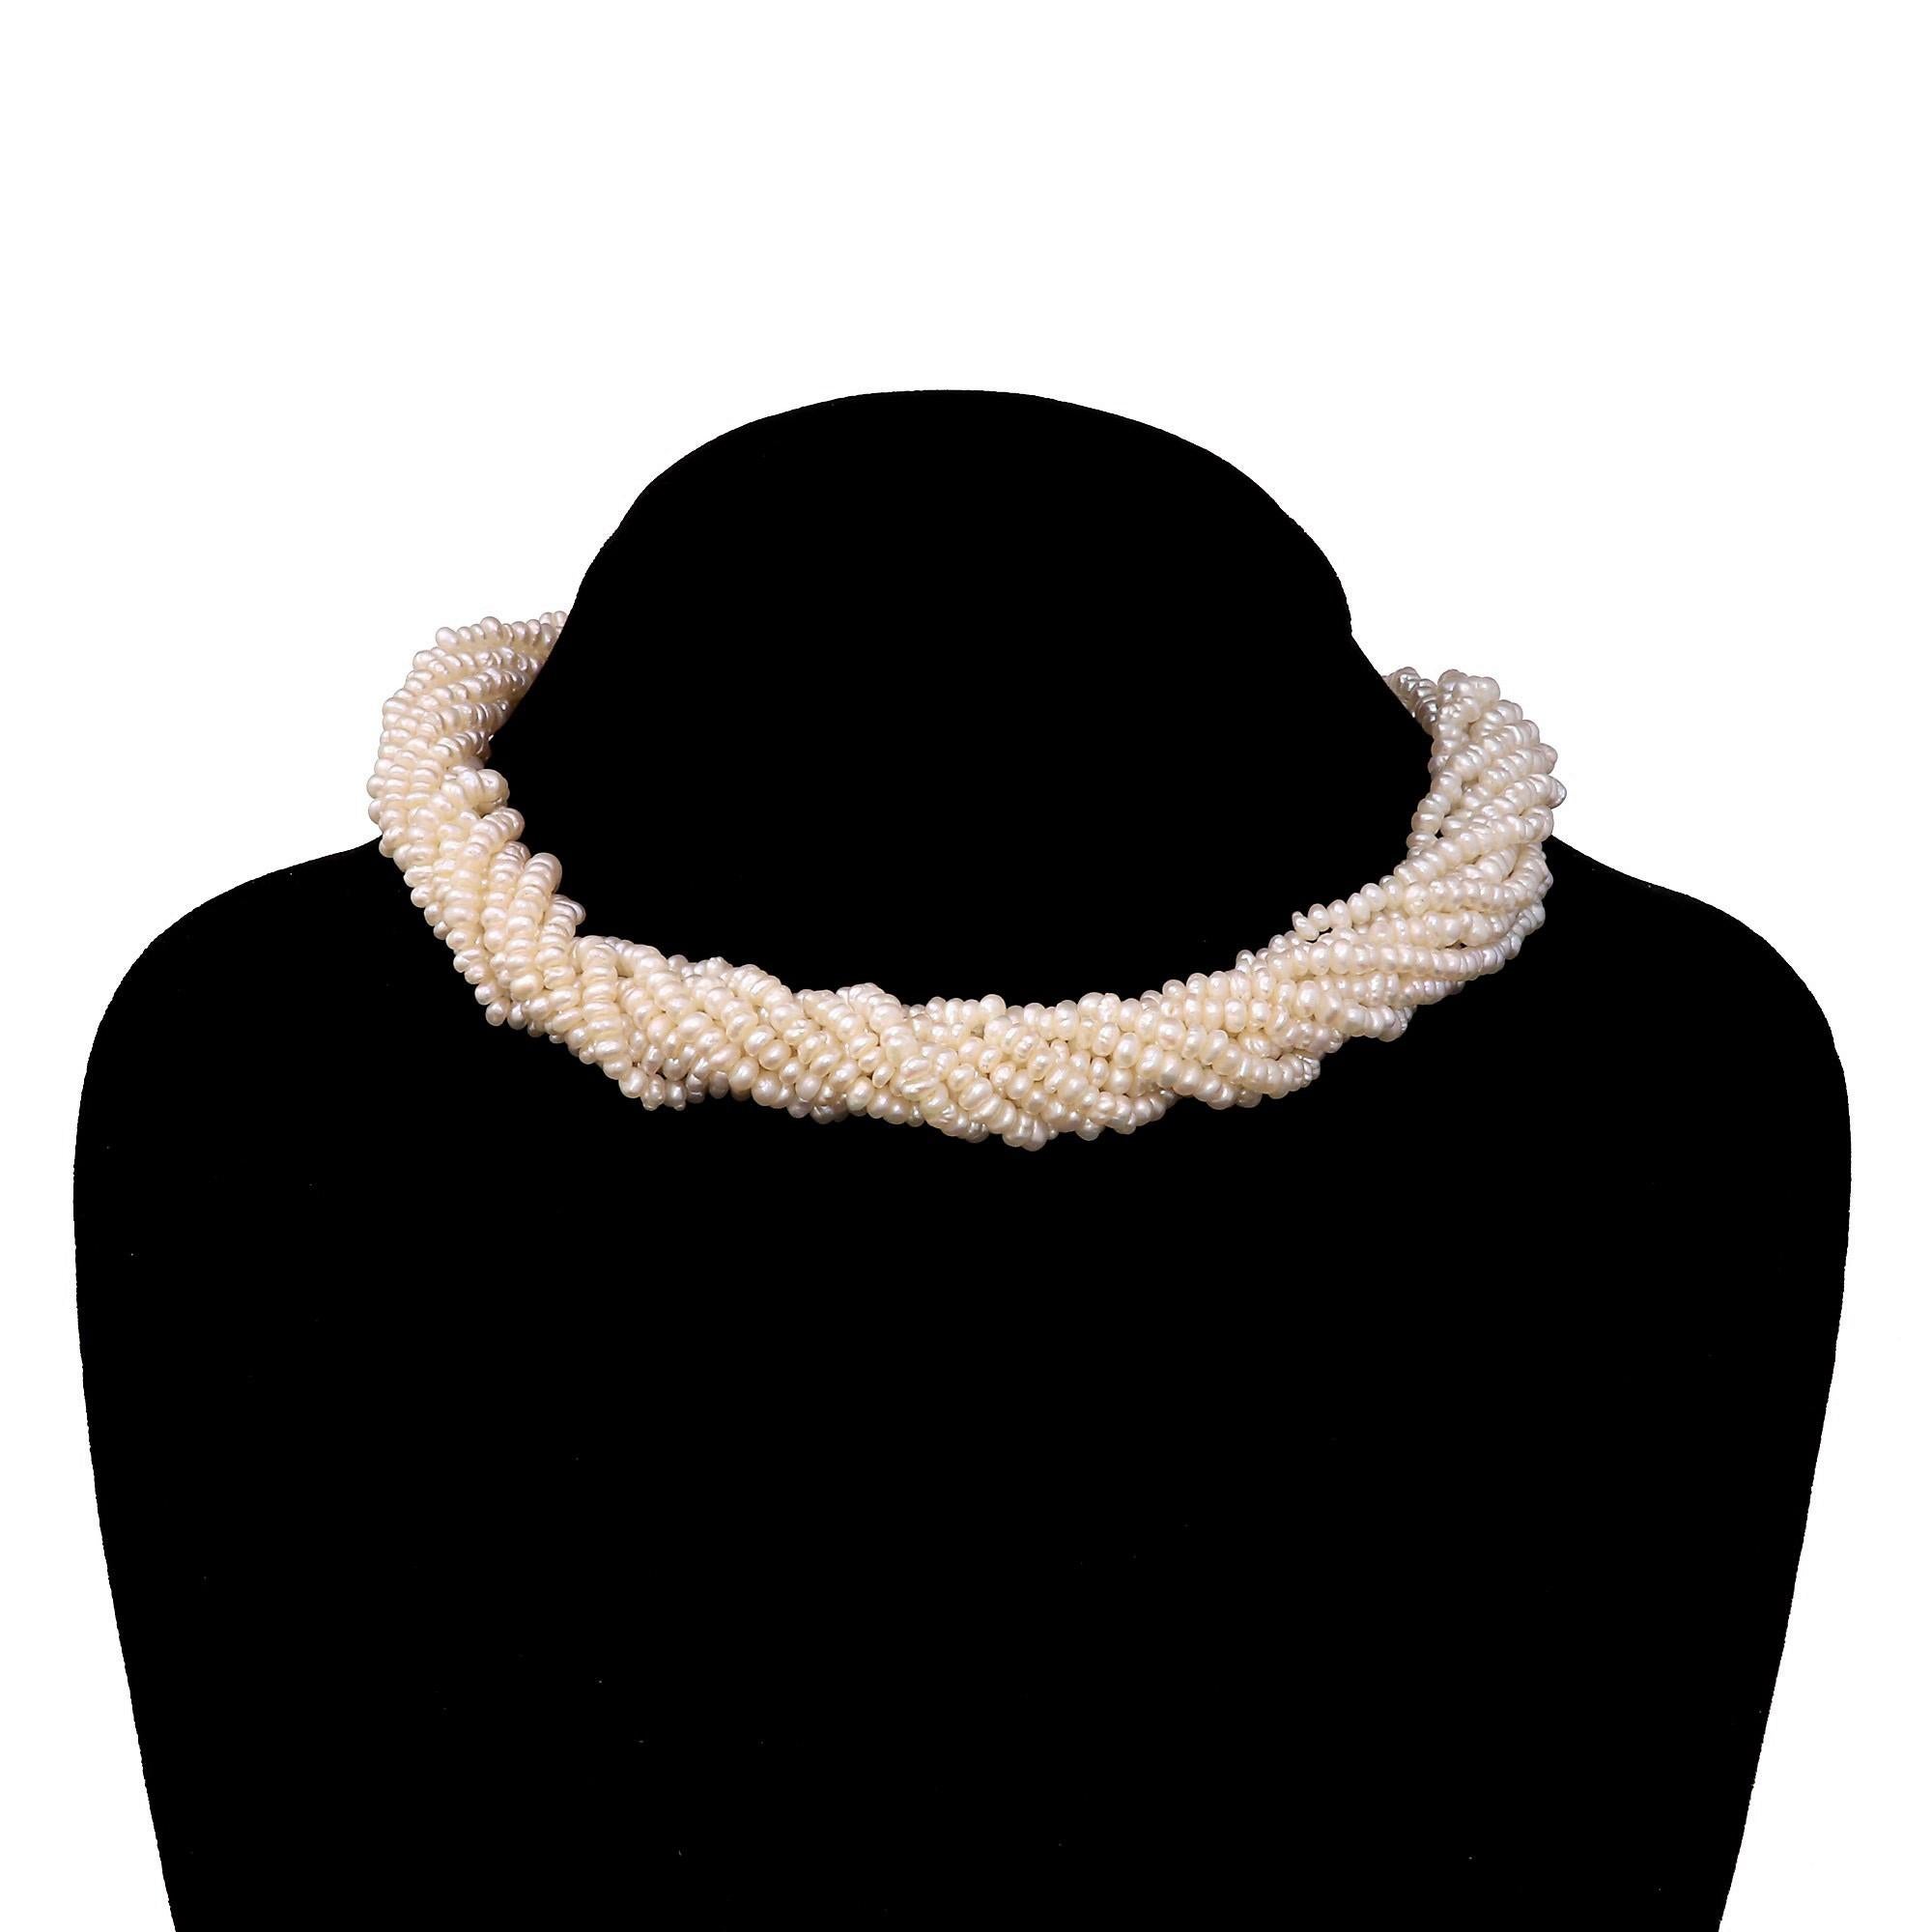 Beautiful vintage 9 strand freshwater pearl necklace with a heavy 14K yellow gold clasp decorated with diamonds.
Be in style this 2020. All the major fashion houses and magazines including Vogue and Harper's Bazaar are saying pearls are